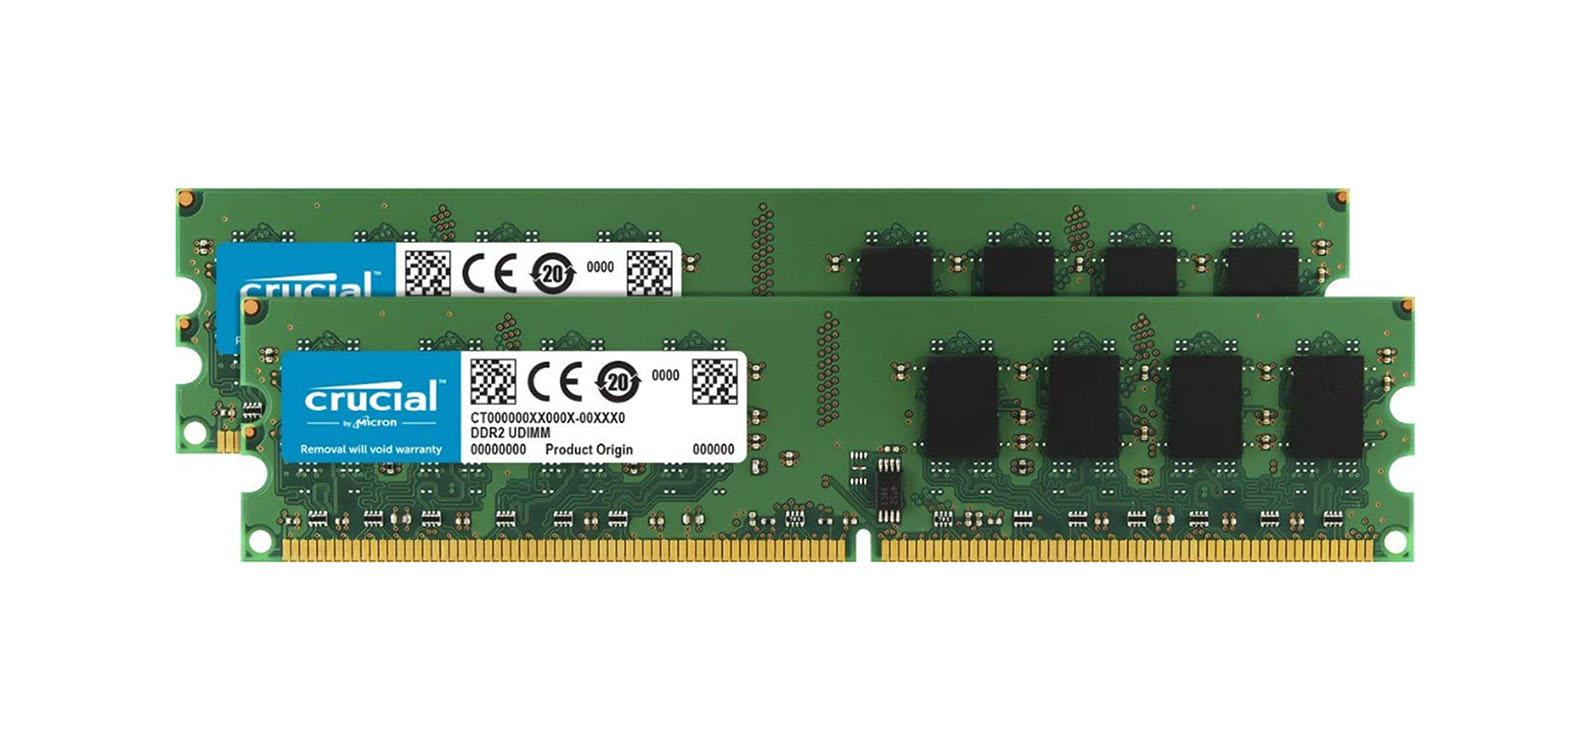 Crucial CT788957 8GB Kit (2 x 4GB) DDR2-667MHz PC2-5300 Fully Buffered CL5 240-Pin DIMM 1.8V Memory Upgrade for Supermicro SuperServer 6015W-UB/V System